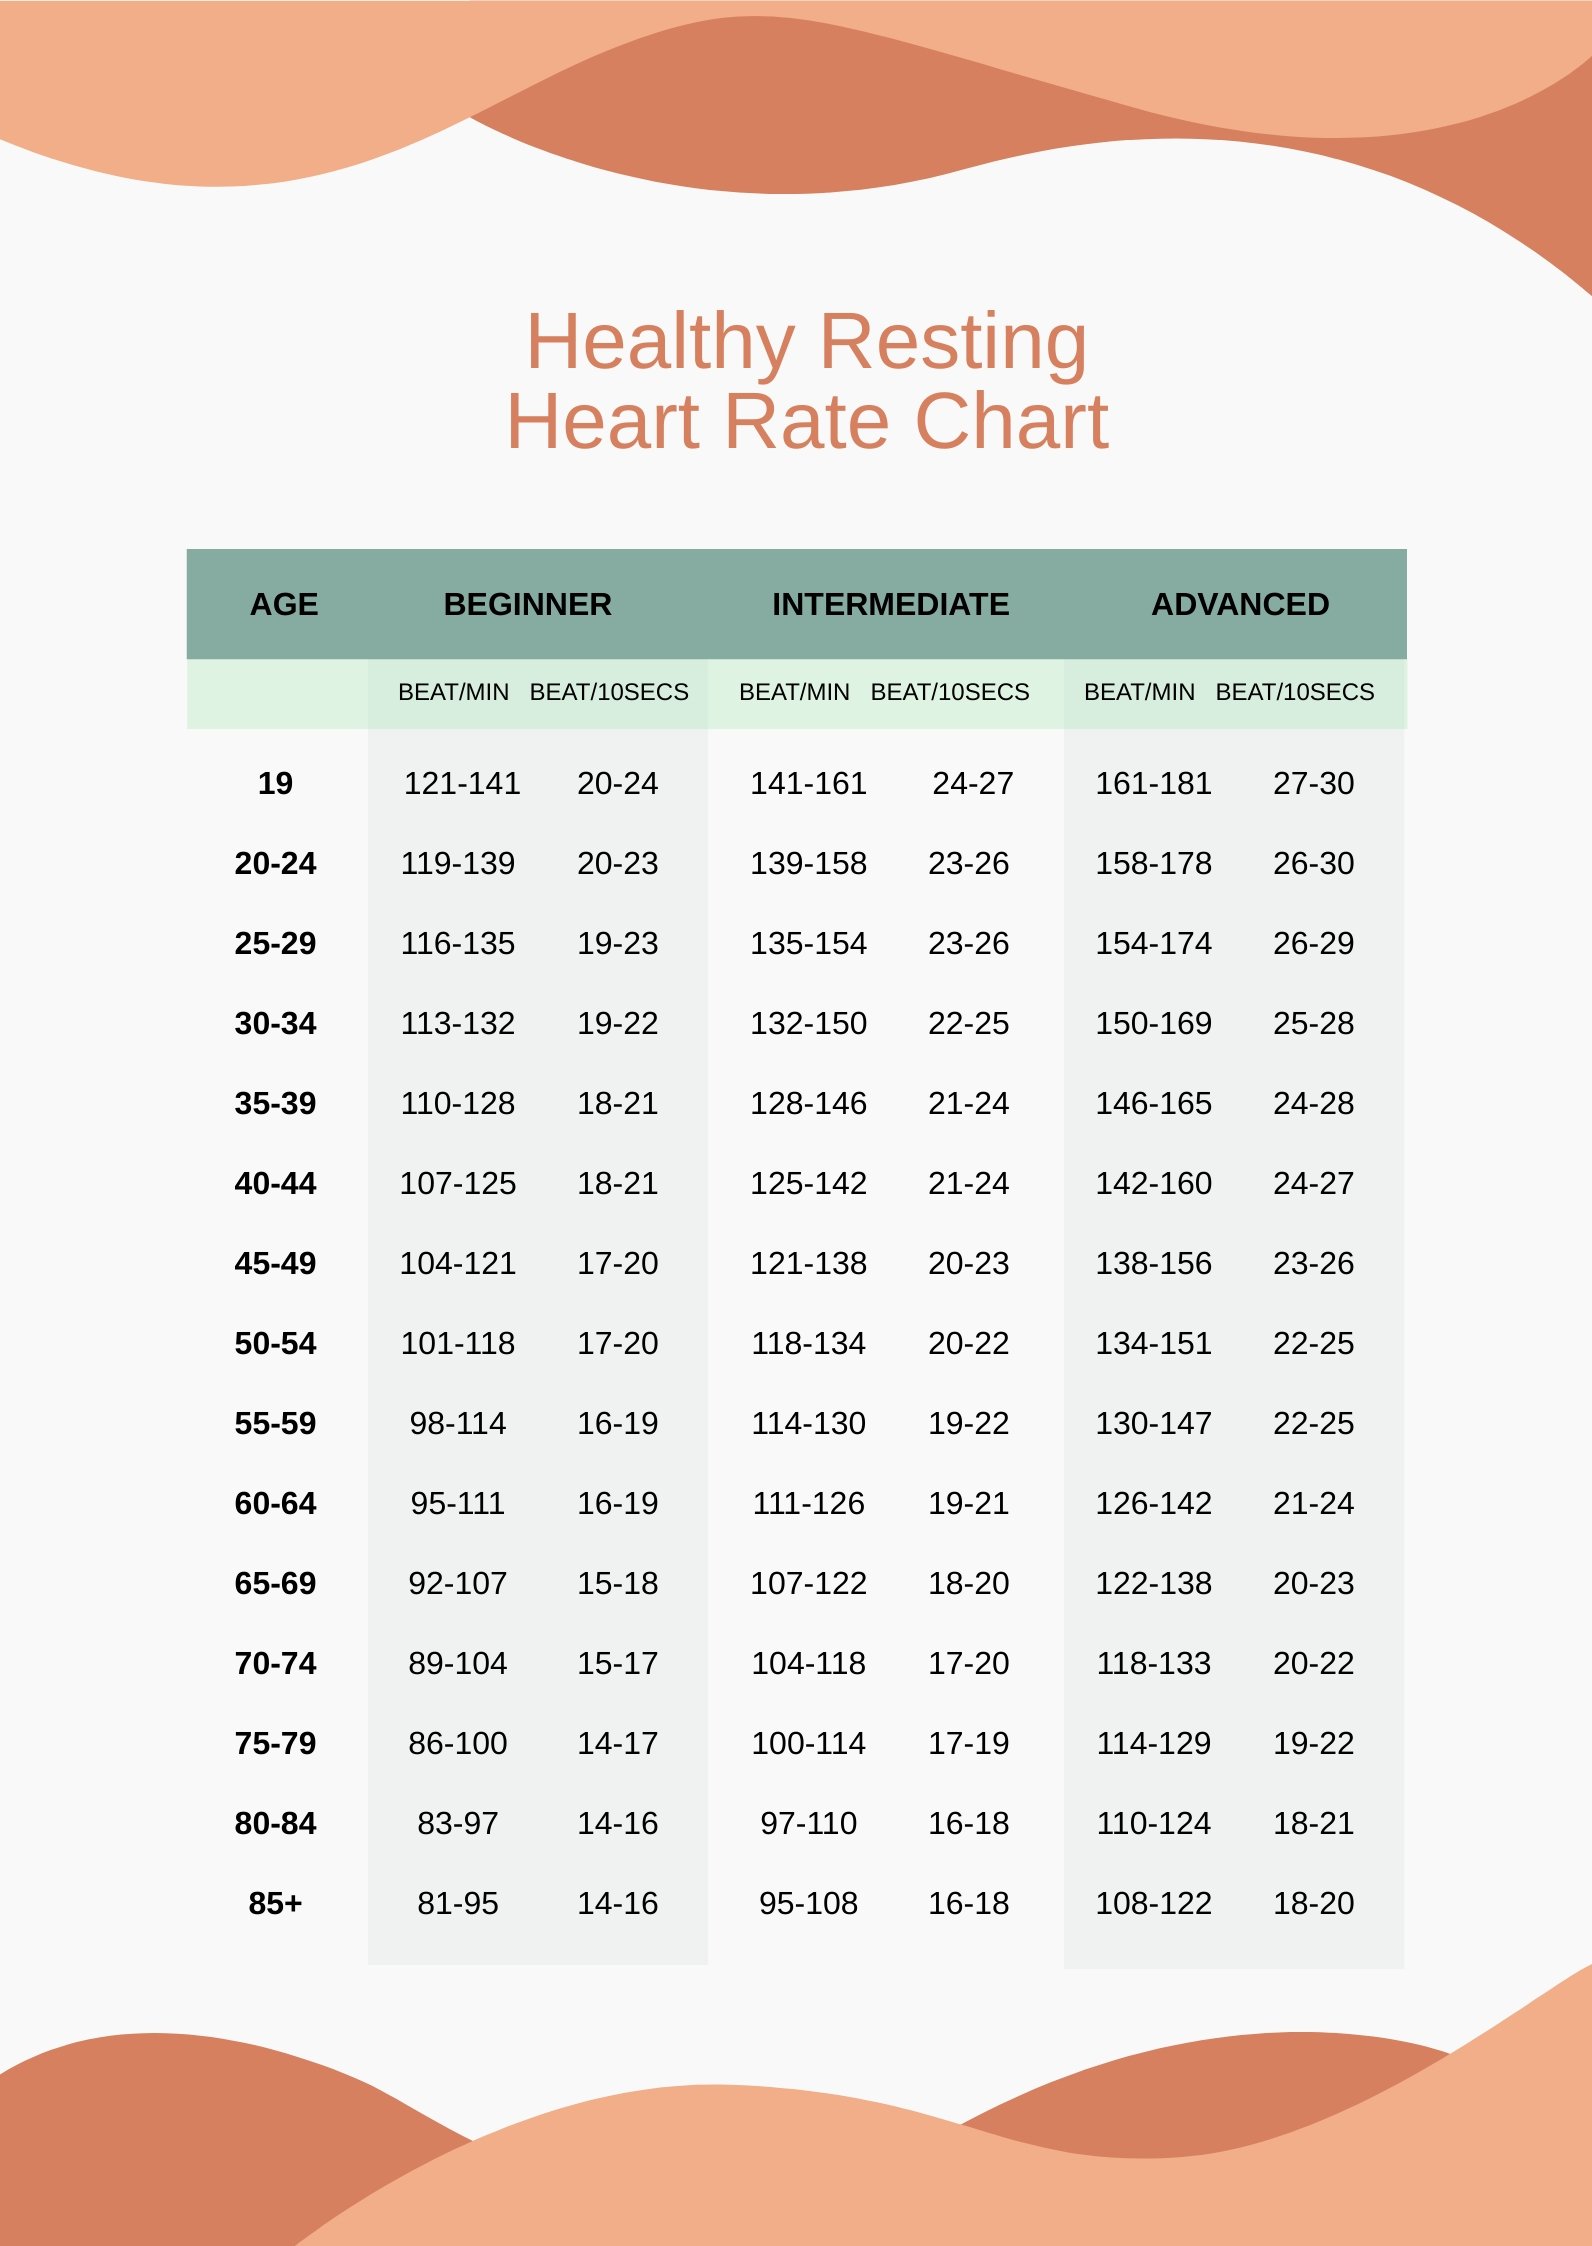 normal heart rate